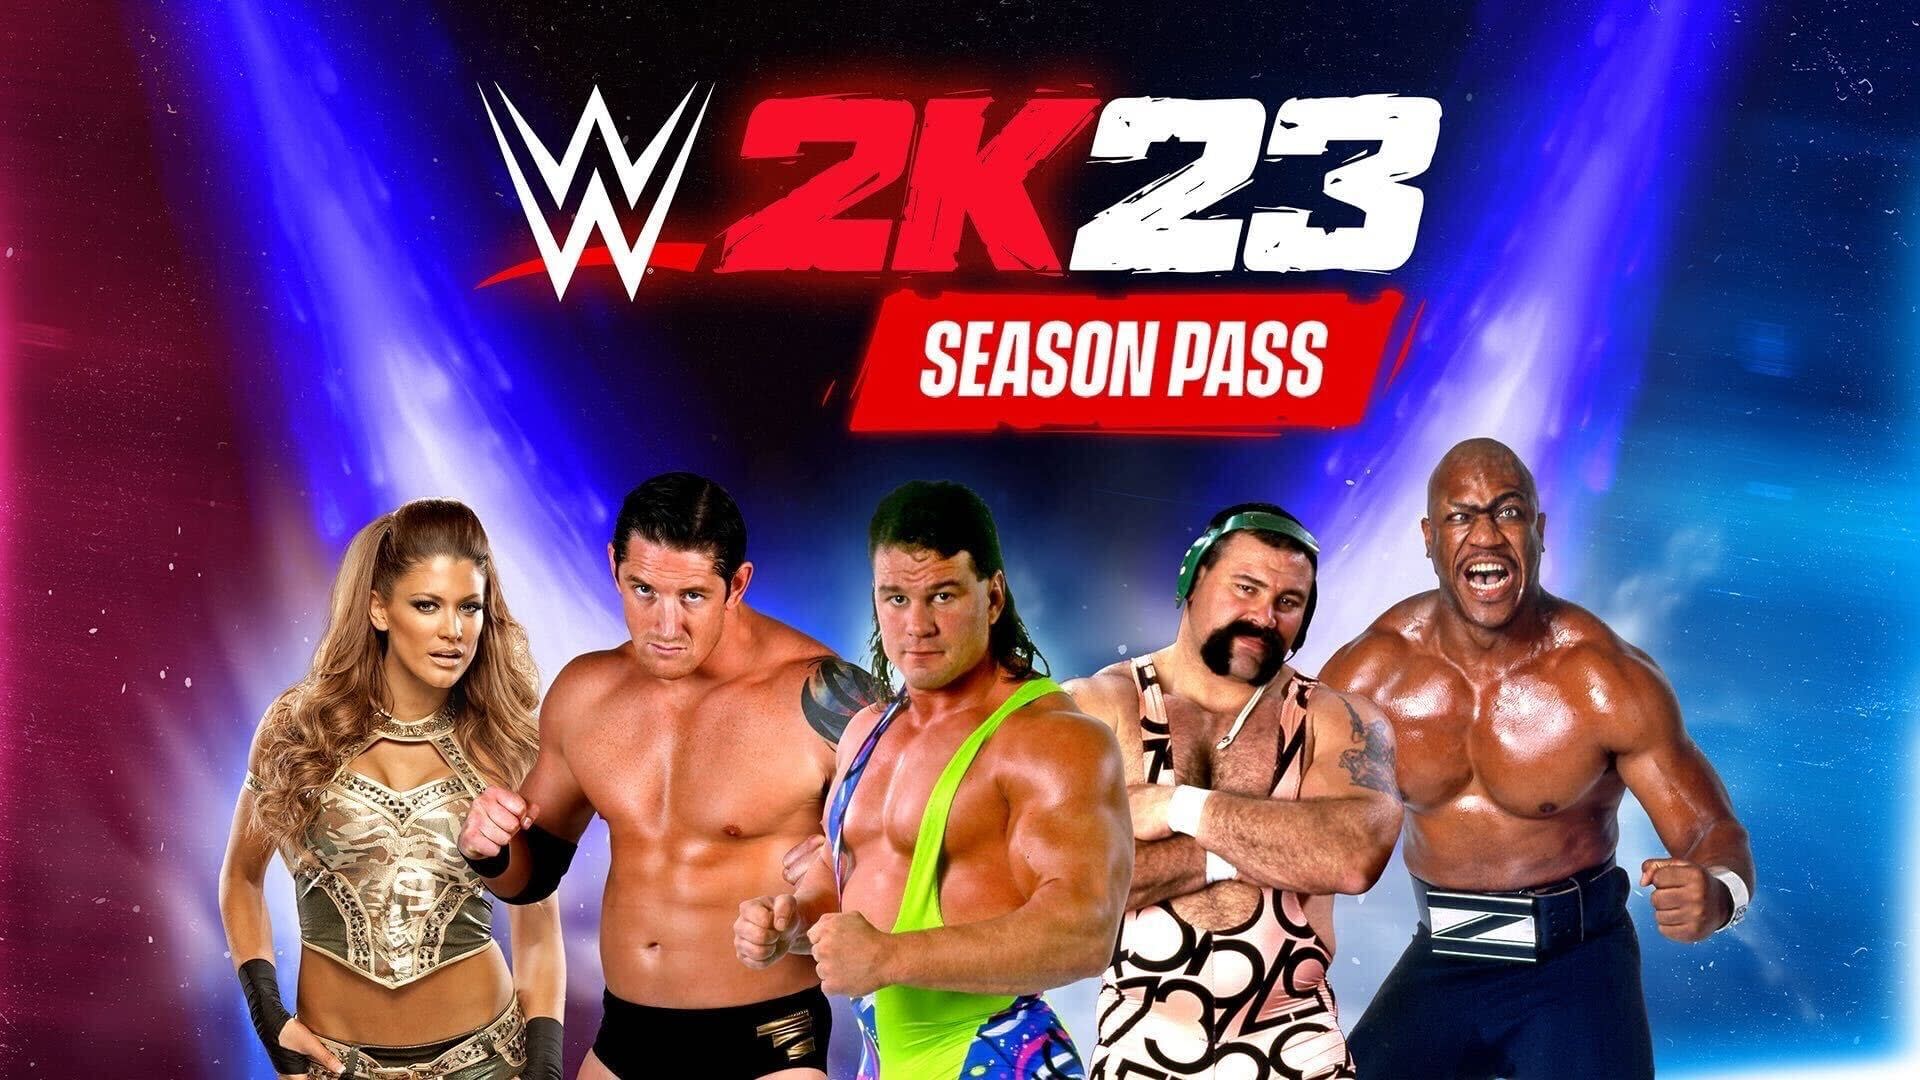 WWE 2K23 stands out 24 super stars and legends in the post-start content road map